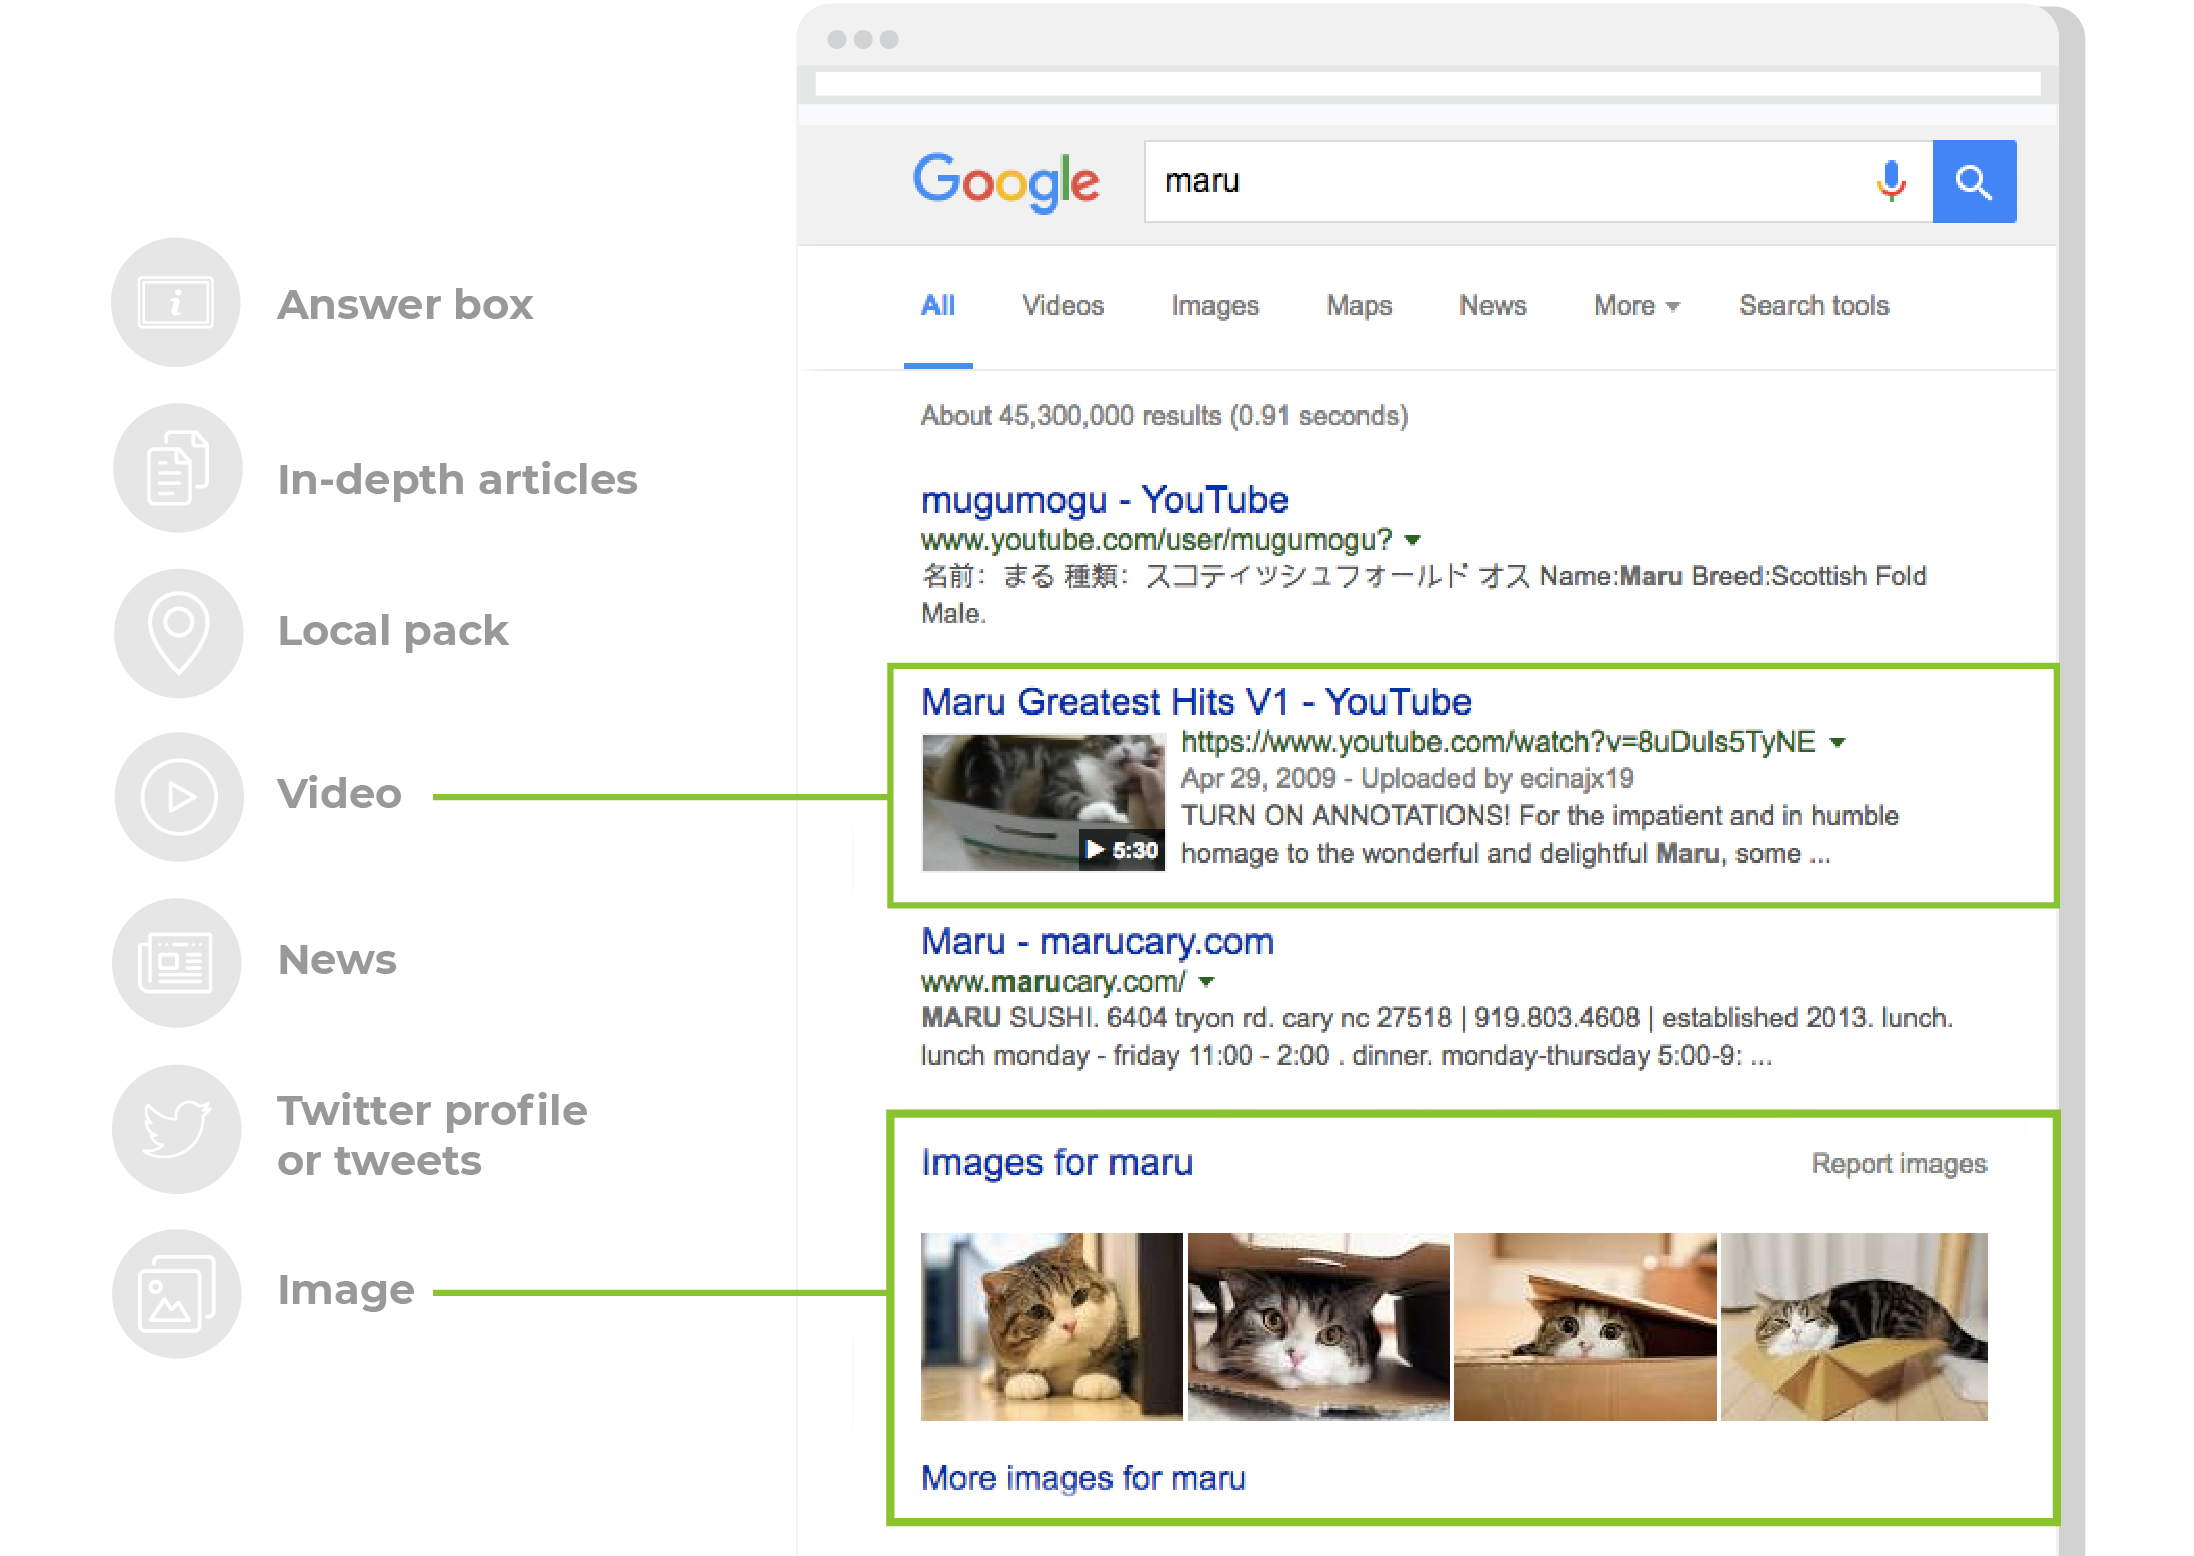 Google now includes multiple different types of search results; build your content strategy accordingly.